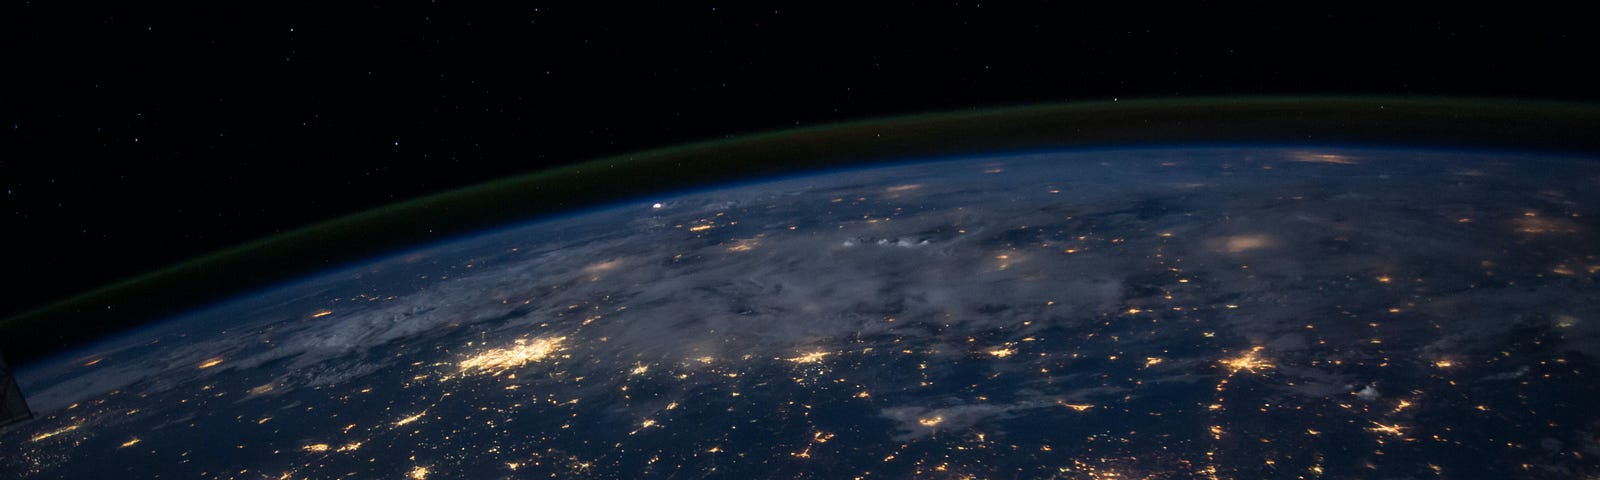 Earth as viewed from above, with sparks of light where electricity is gathered, looking like a network map